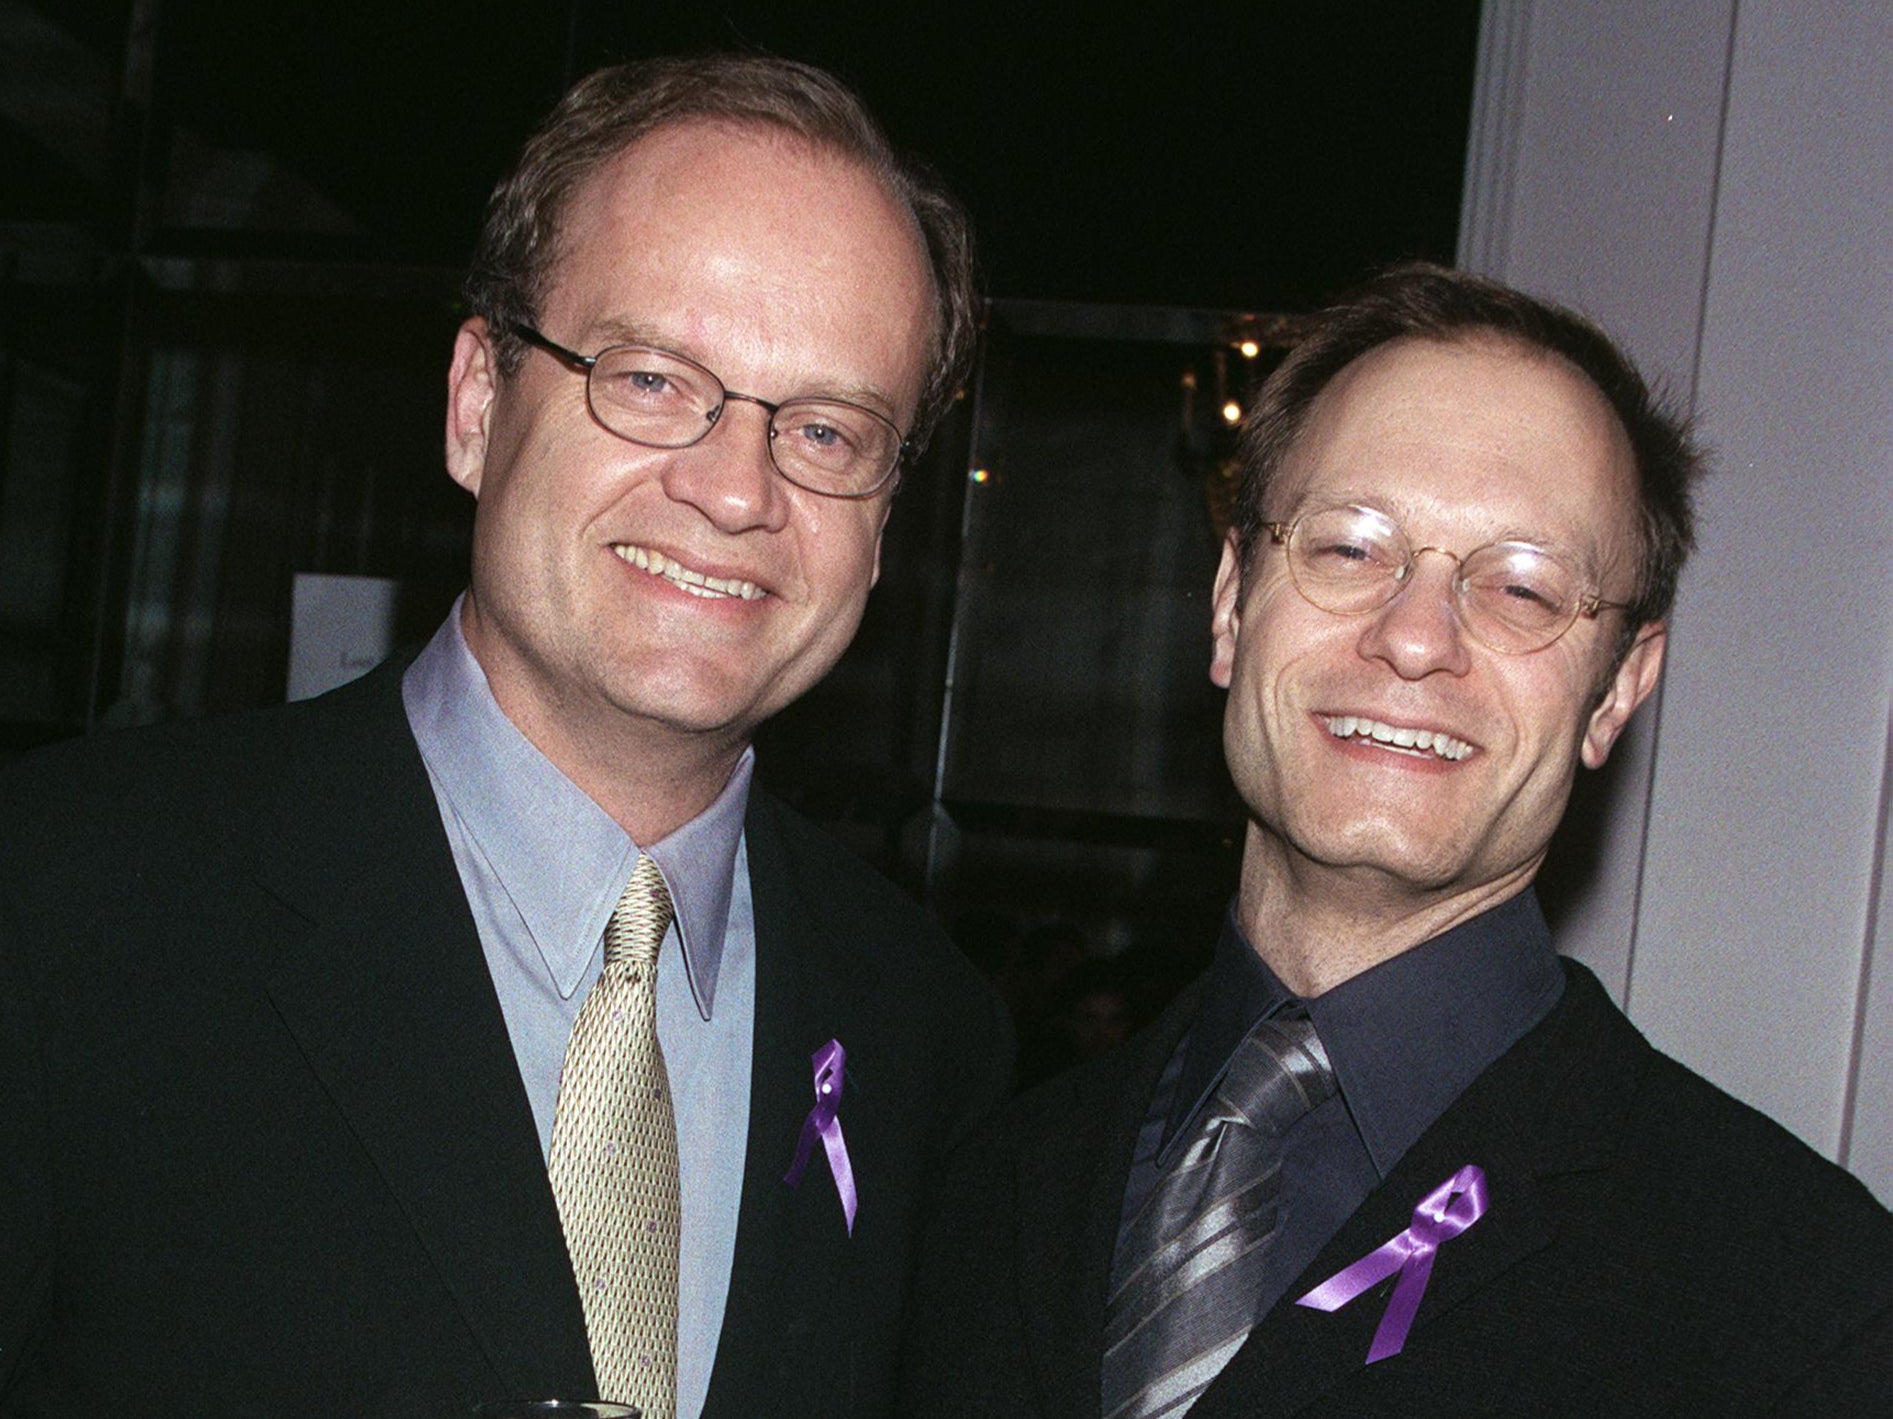 Grammer pictured together with ‘Frasier’ co-star David Hyde Pierce at a function on 8 March 2001